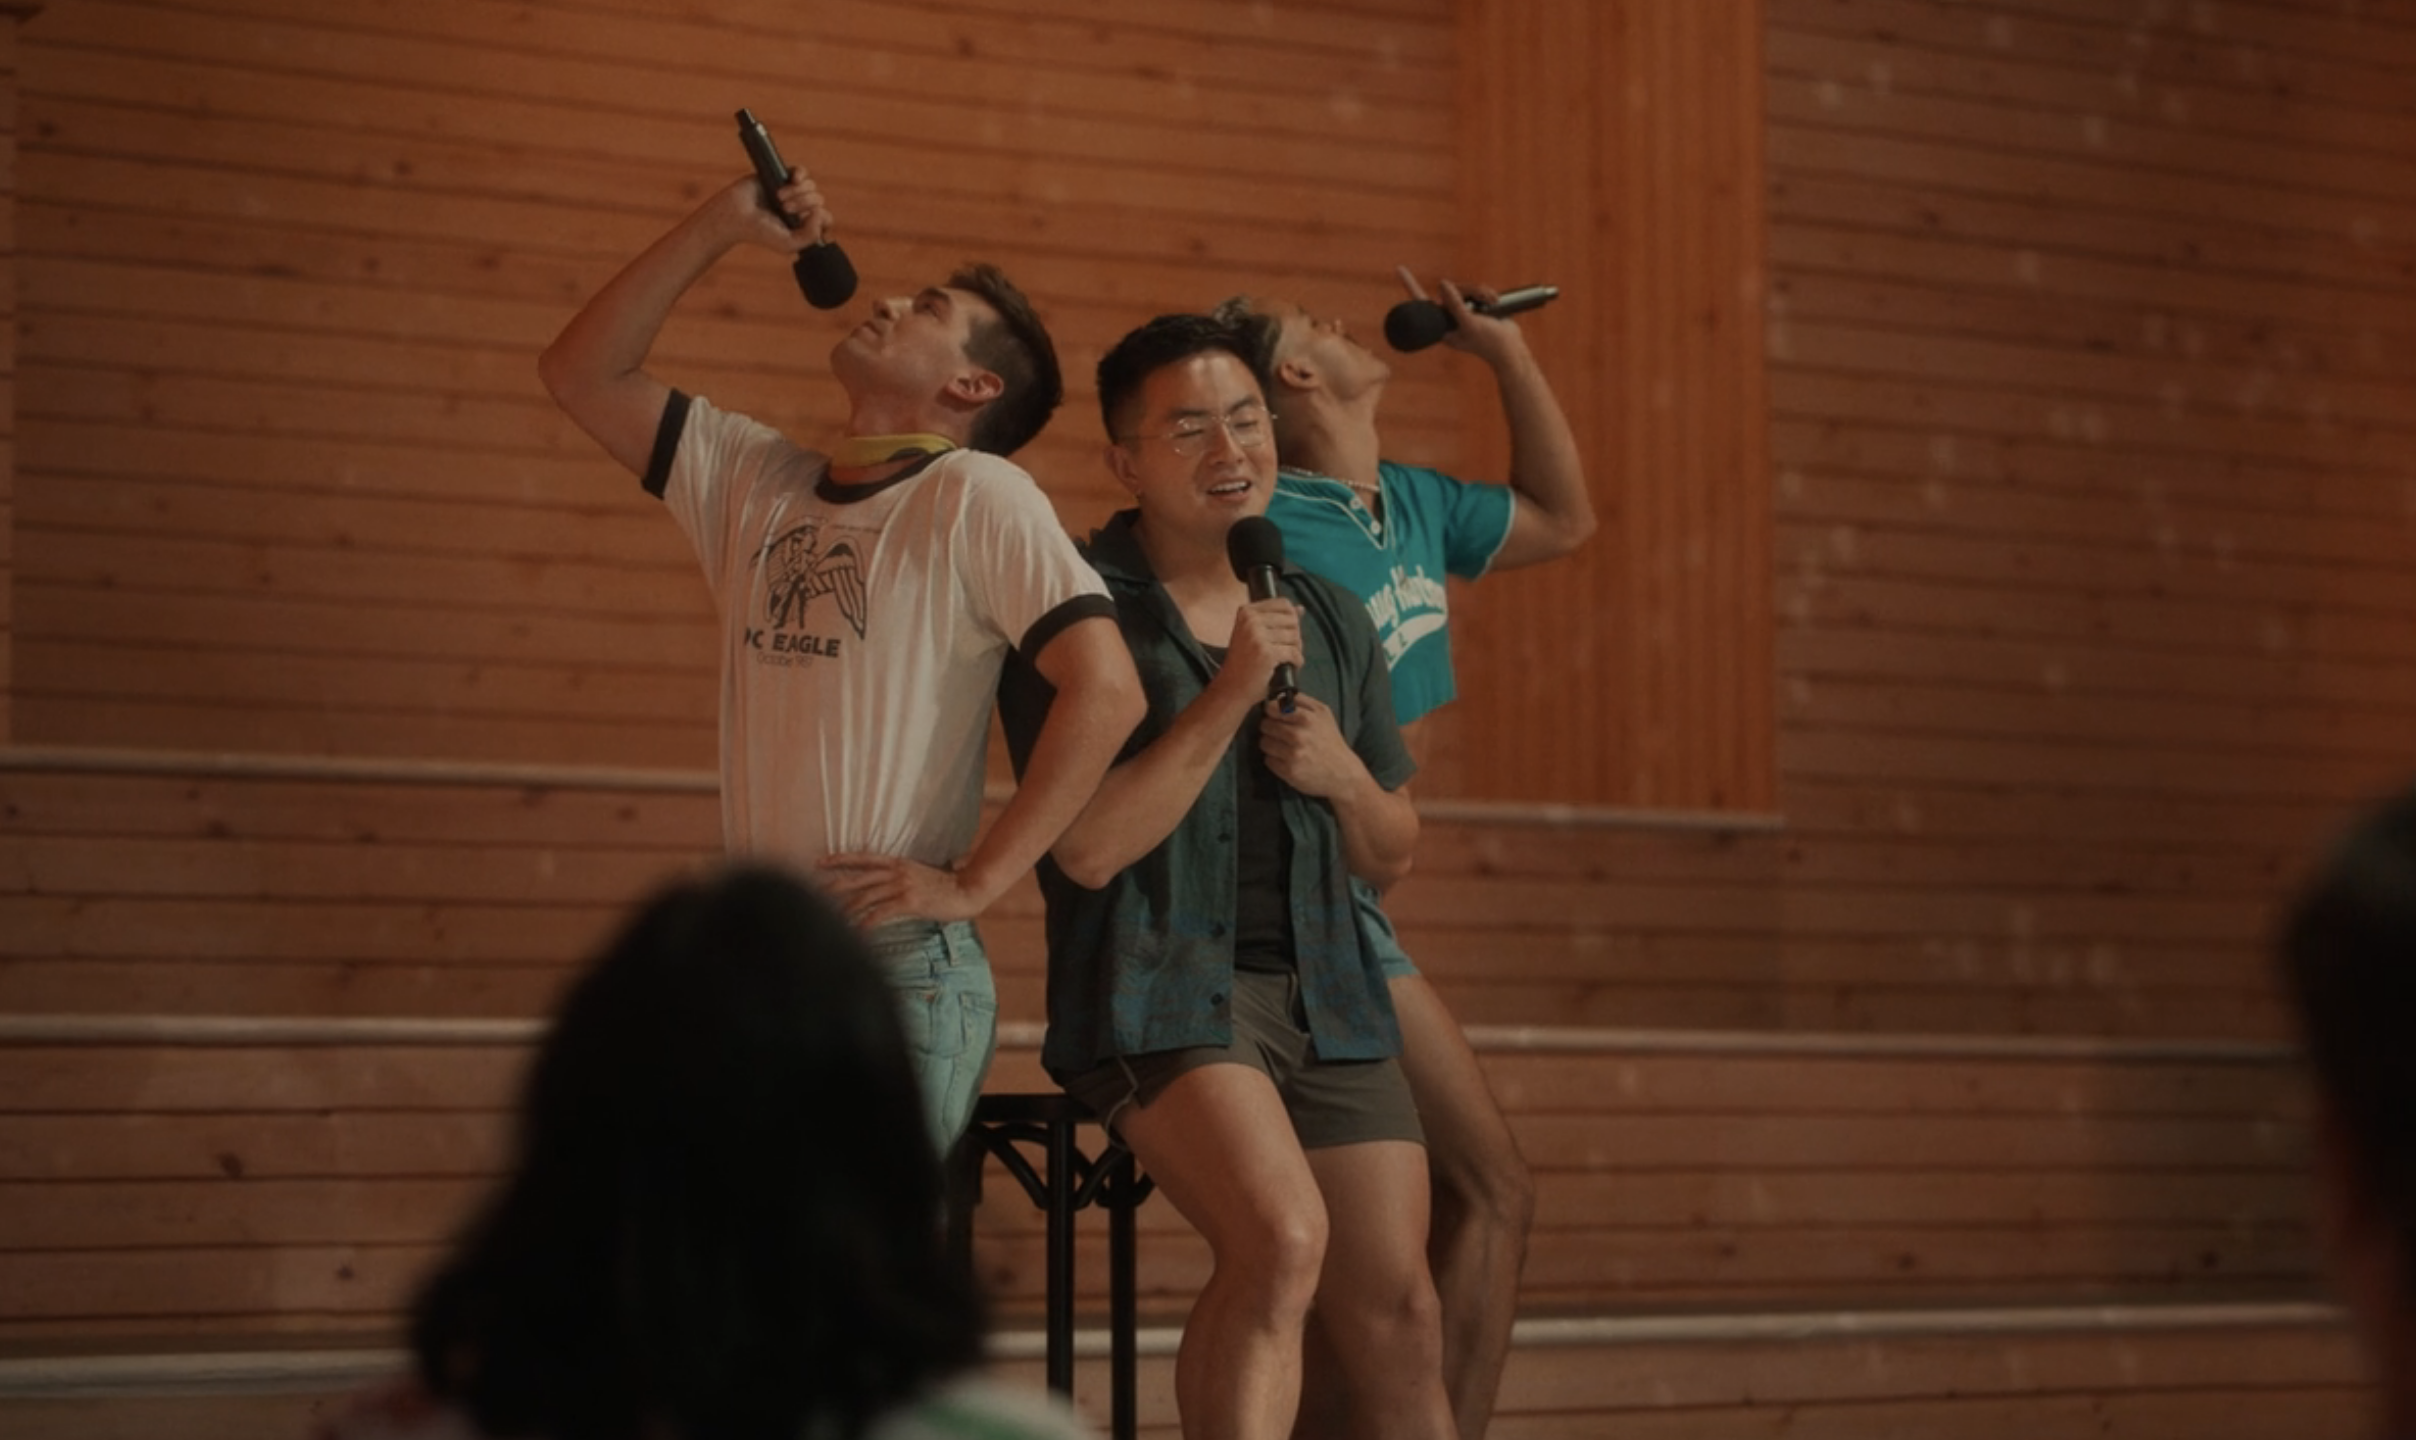 The three men — Rogers, Yang, and Matos — sing into microphones